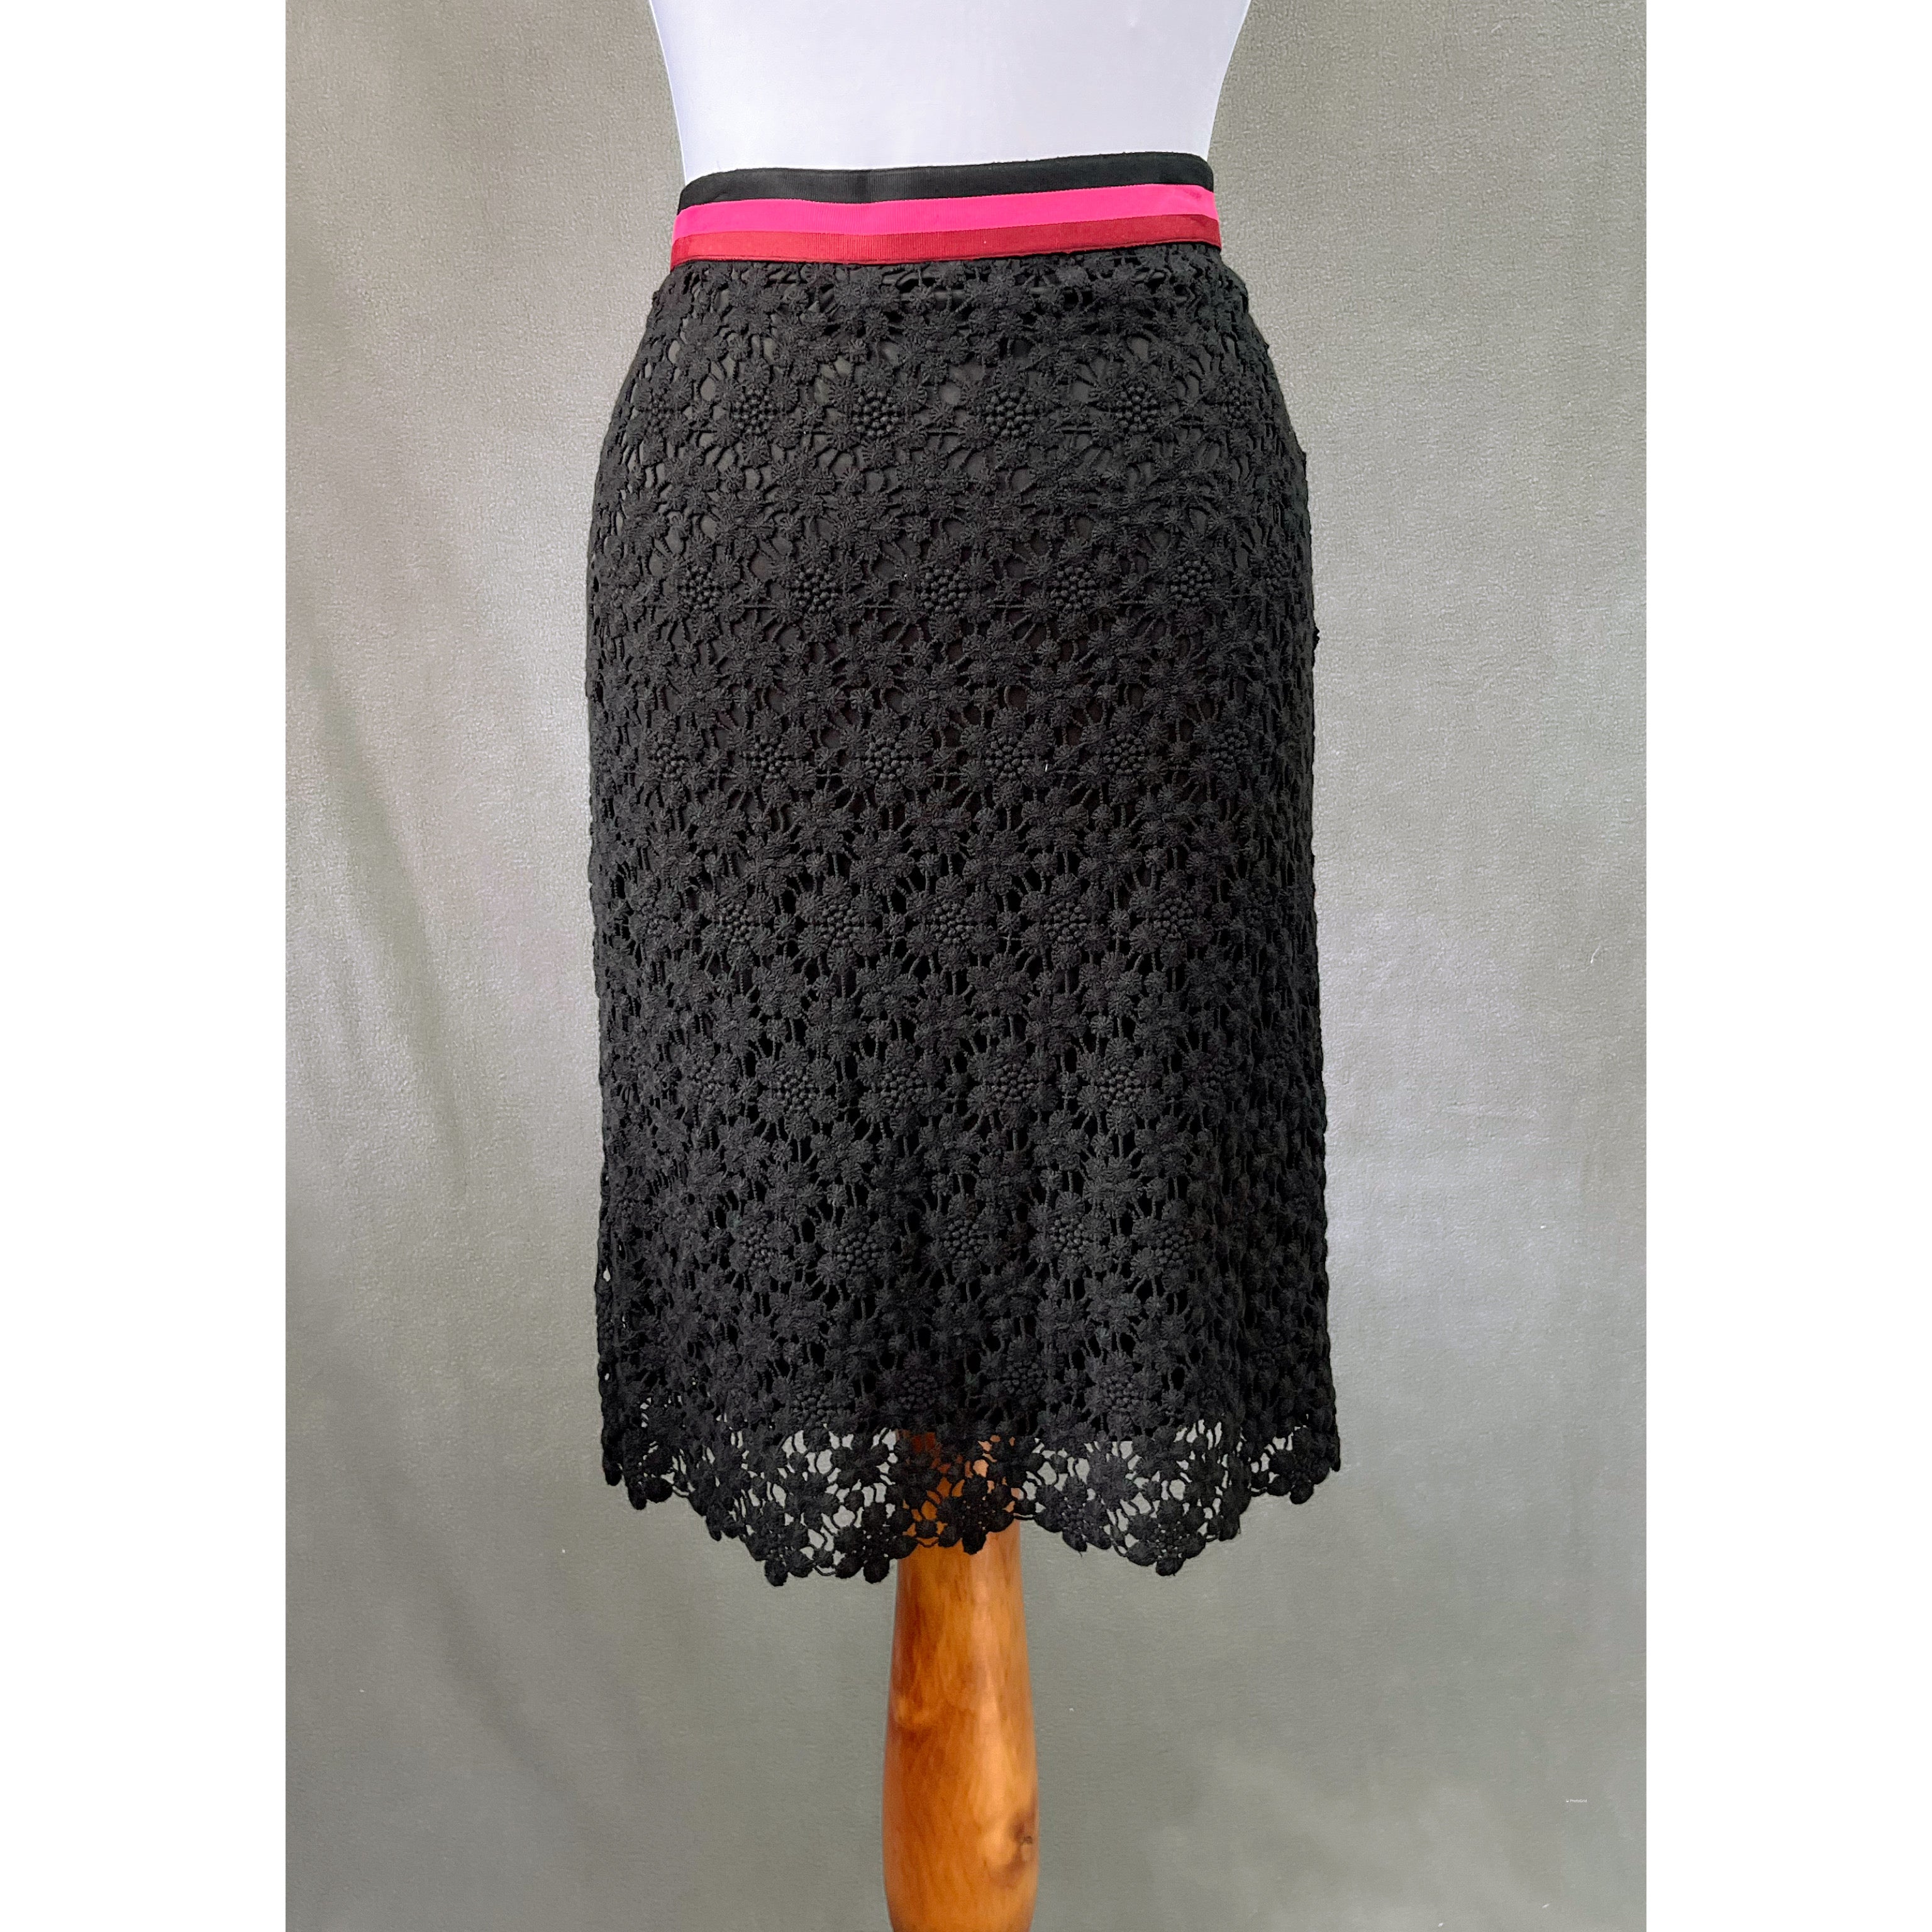 Trina Turk black lace skirt, size 4, NEW WITH TAGS!